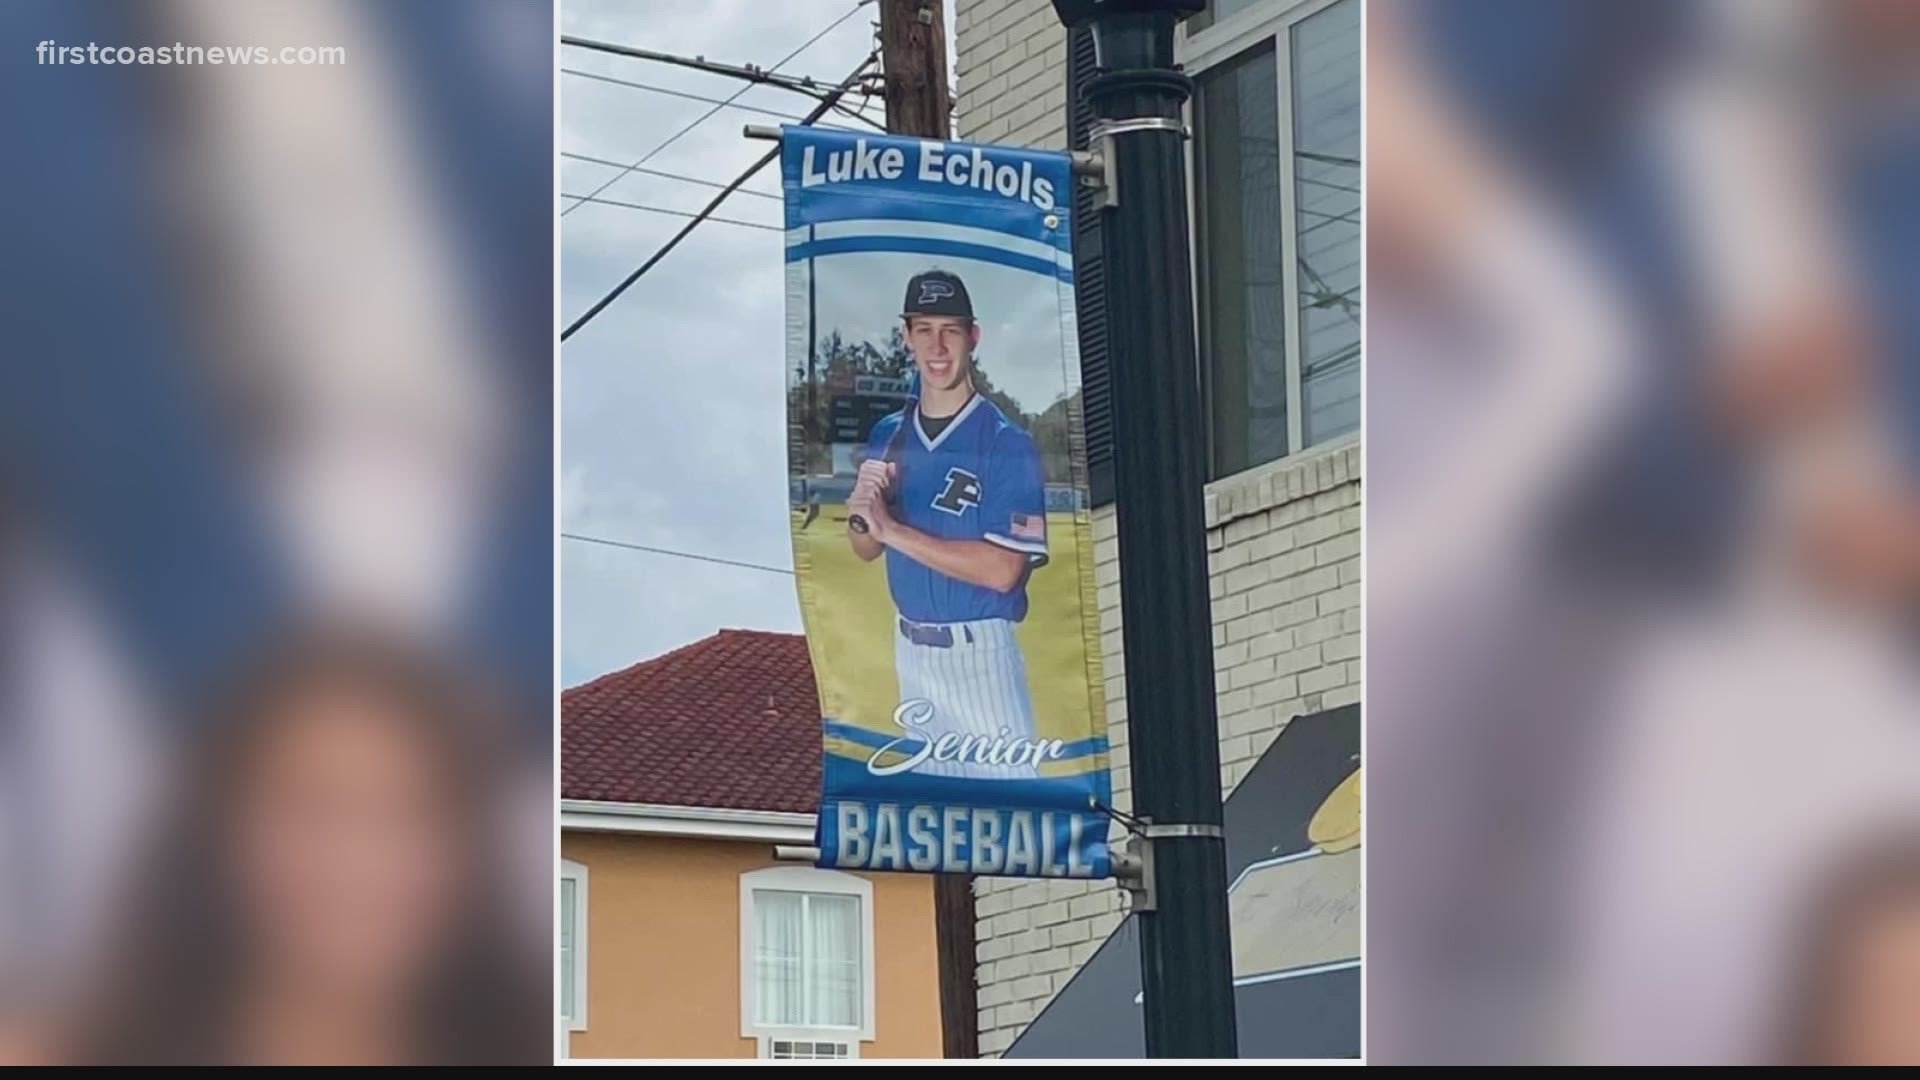 In the city’s downtown, residents hung banners of 37 seniors who play golf, track, tennis, baseball, and soccer.